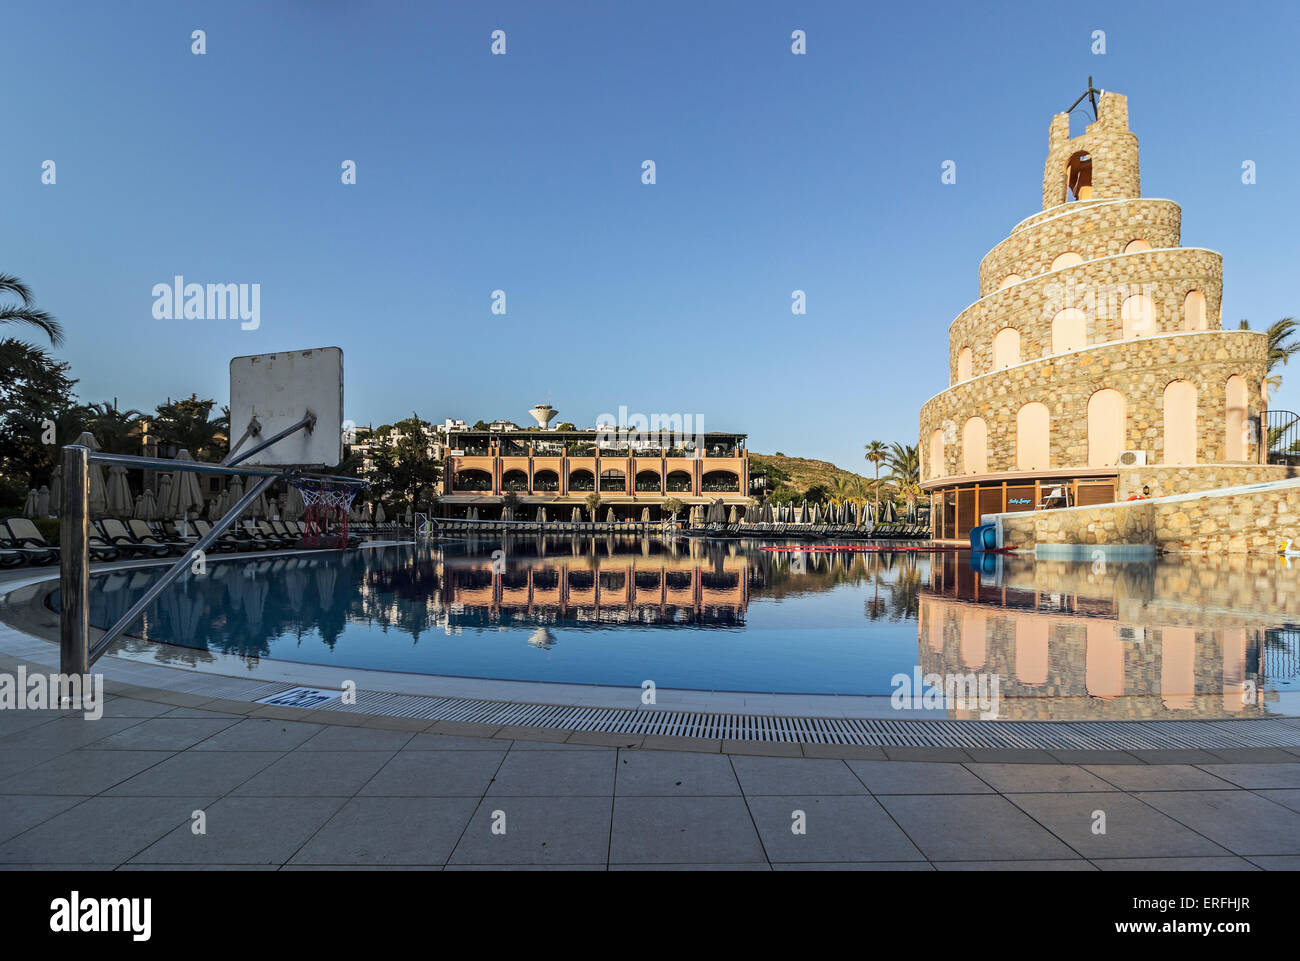 Pool, waterslide and restaurant at the Bodrum Imperial hotel at dusk in the Turgutreis region of Turkey. Stock Photo